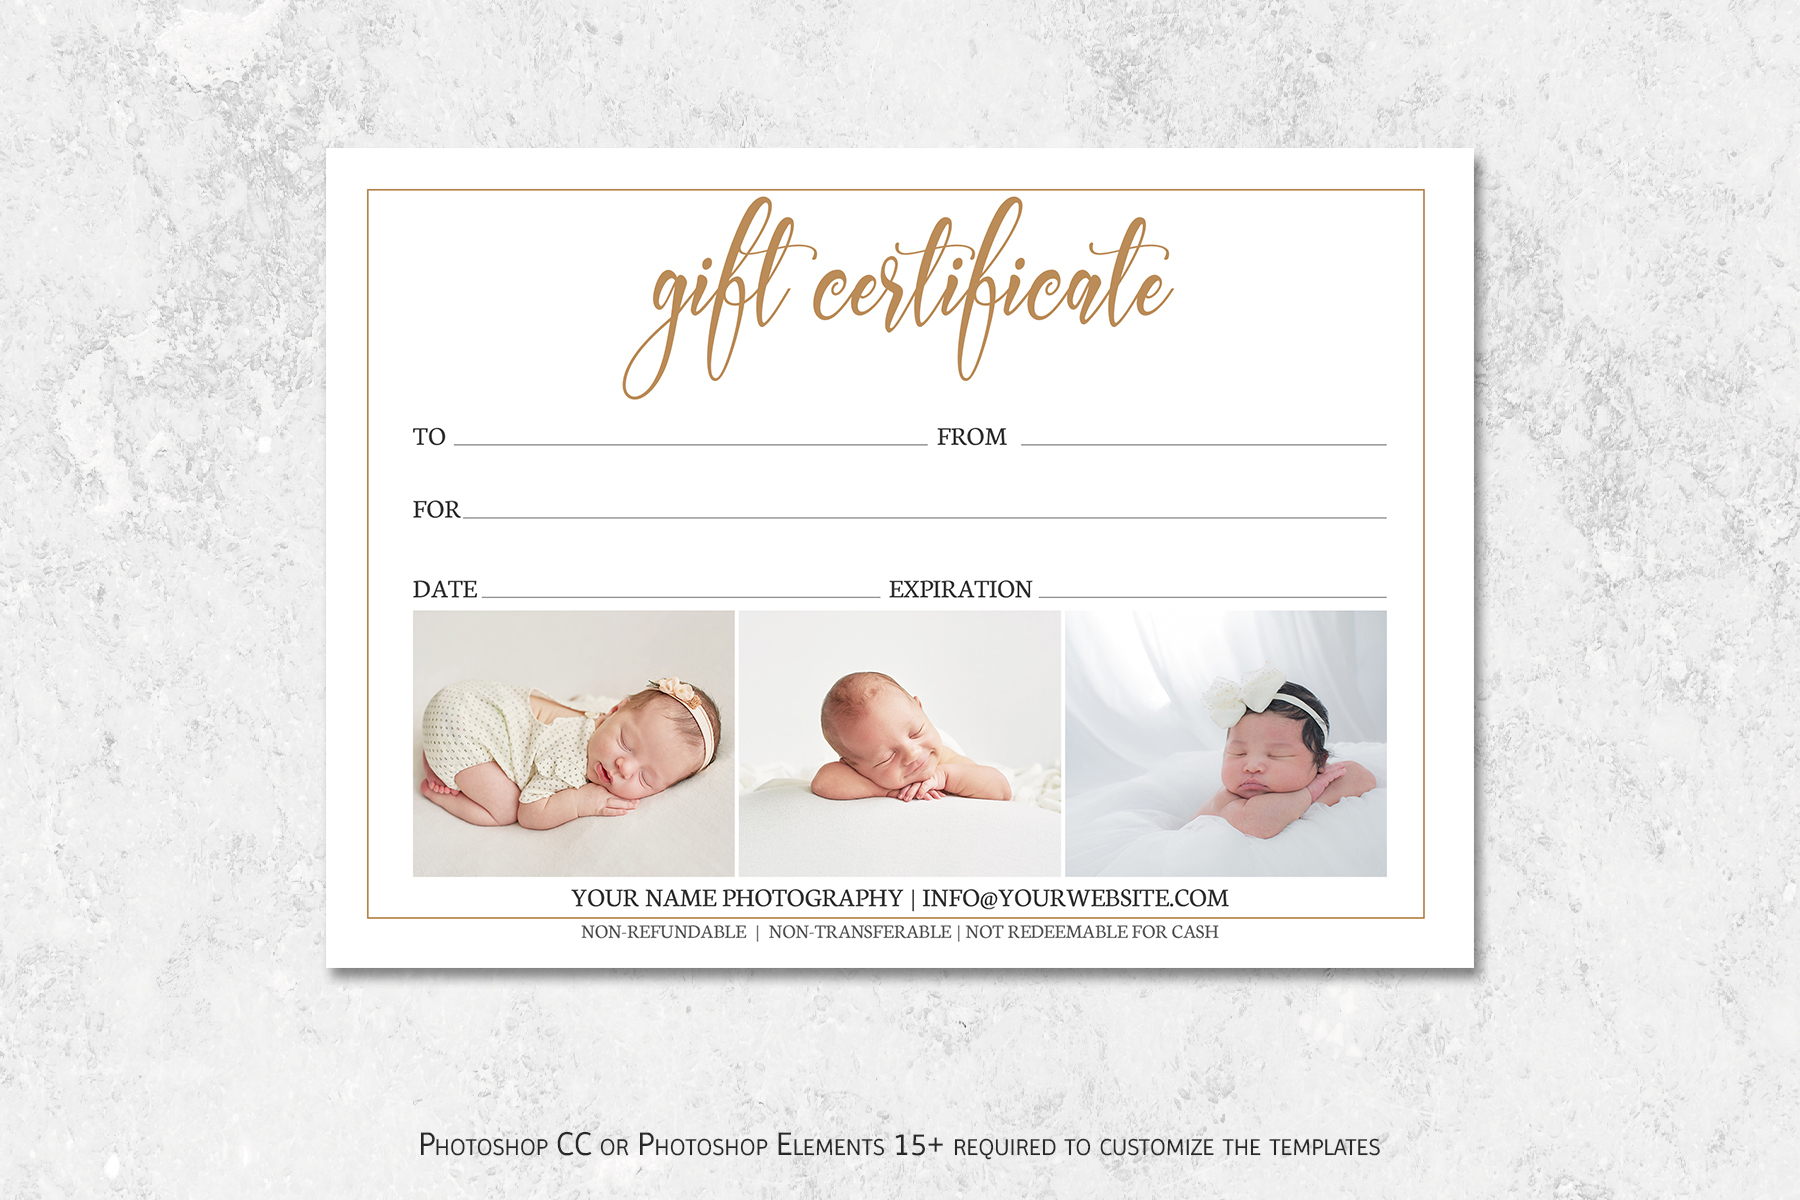 002 Template Ideas Photography Gift Voucher For Photoshoot Gift Certificate Template